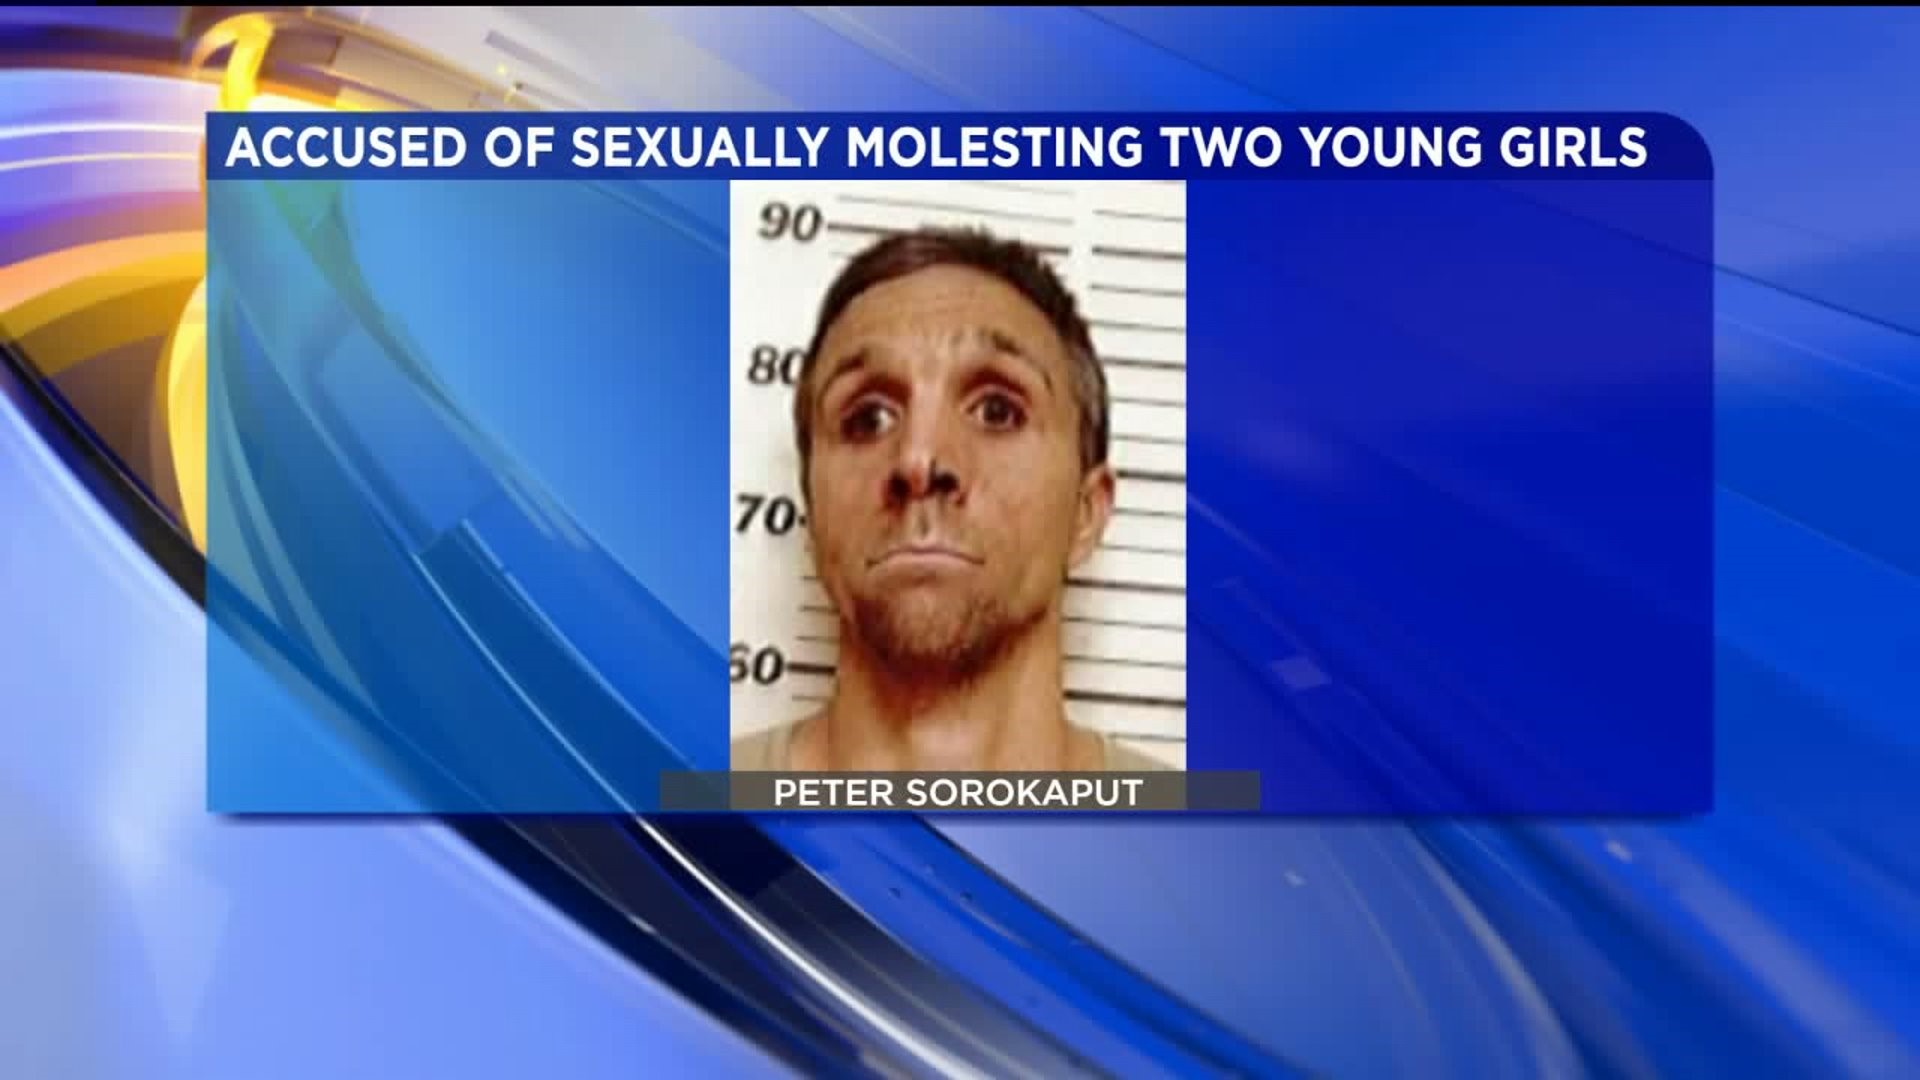 Man Accused of Molesting Two Young Girls